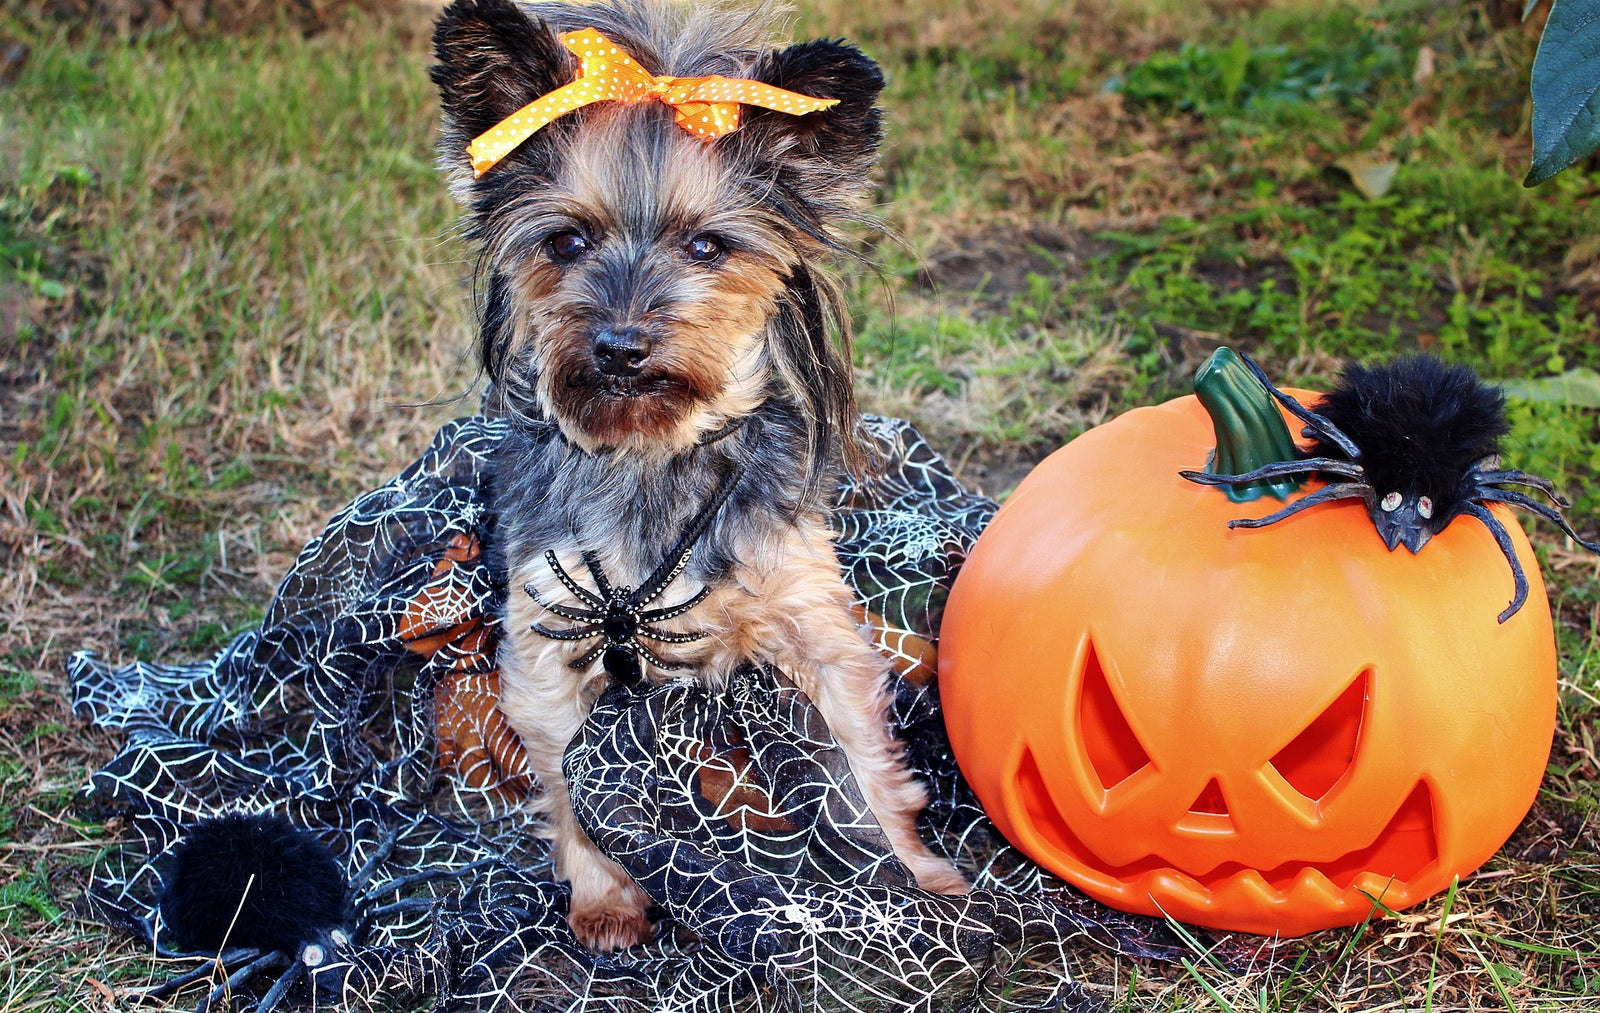 5 Best Places to Purchase a Dog Halloween Costume